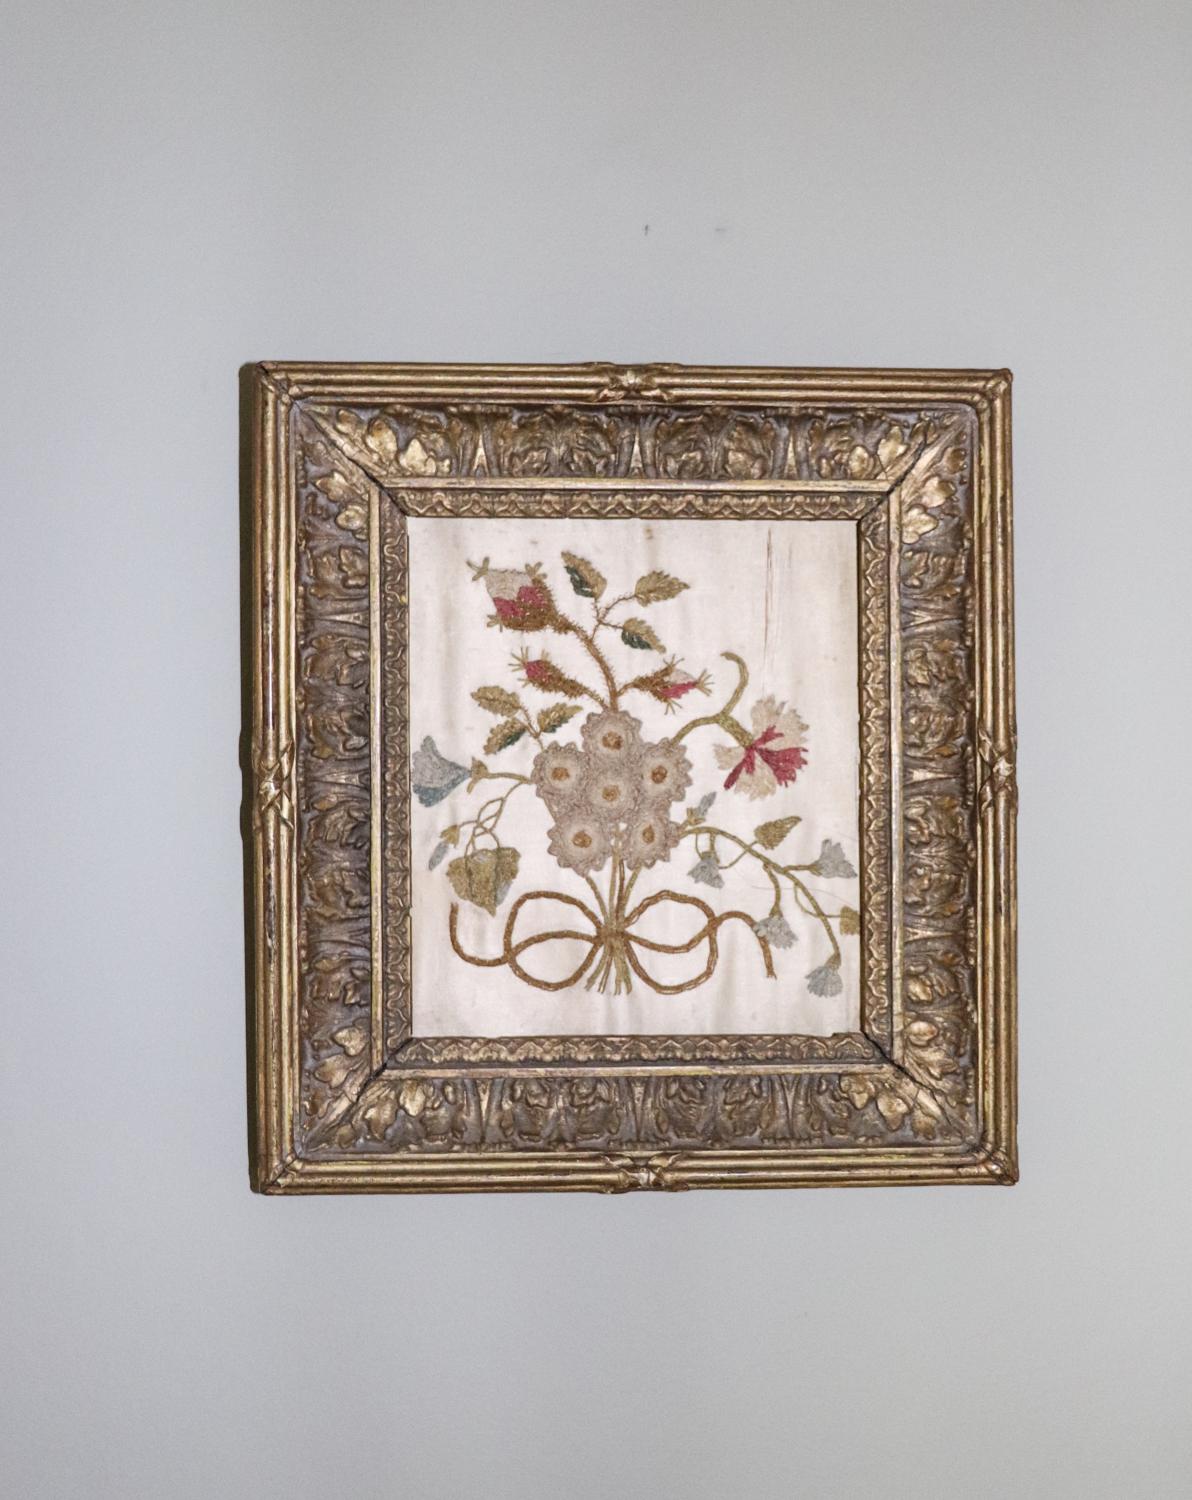 19th century framed floral silk embroidery